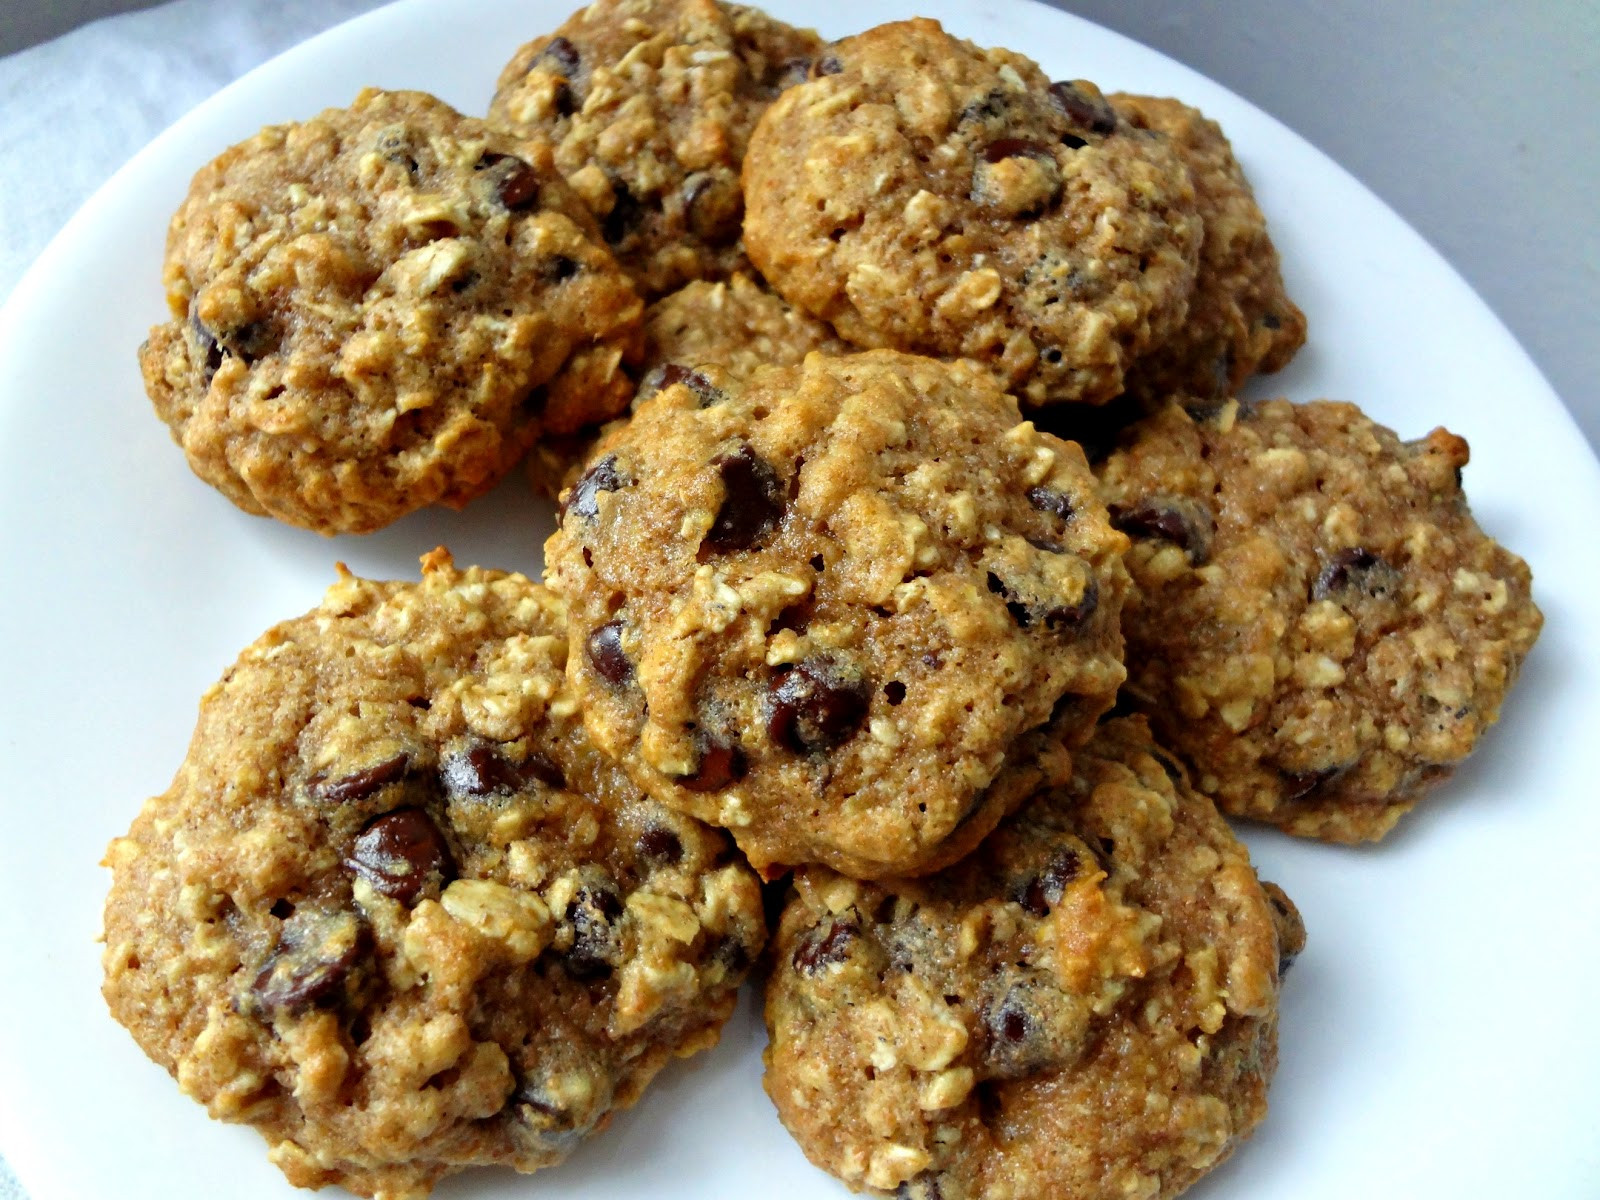 Oatmeal Chocolate Chip Cookies Healthy
 The Cooking Actress Healthy Oatmeal Chocolate Chip Cookies